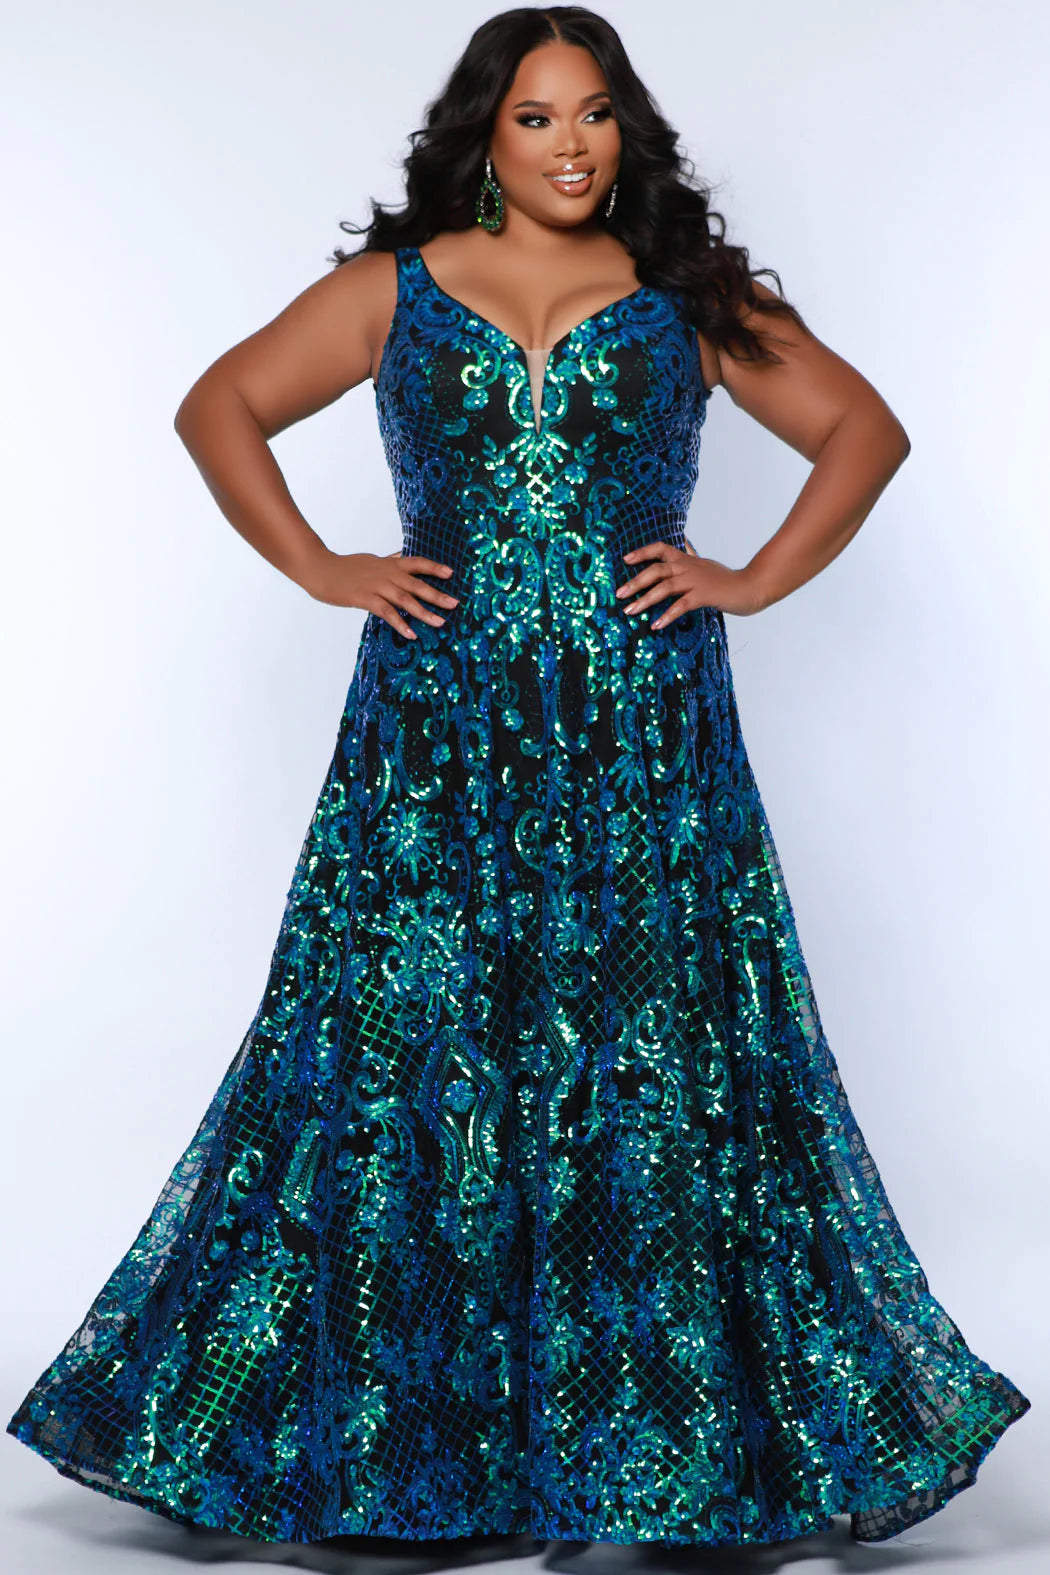 Plus Size Dresses, New Collection And Good Quality Plus Size Dresses  Online